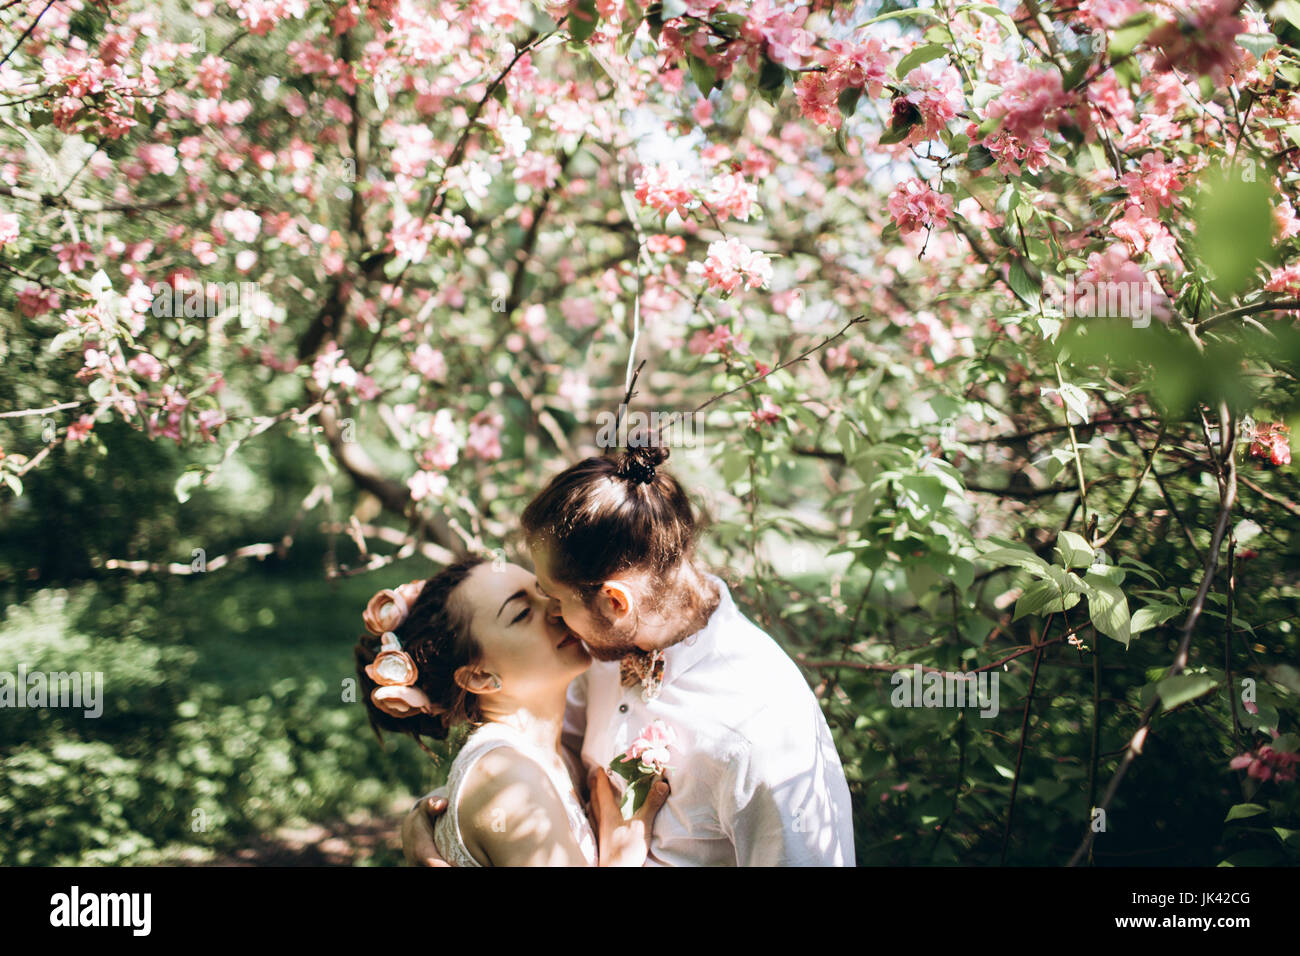 Middle Eastern couple kissing under flowering tree Stock Photo